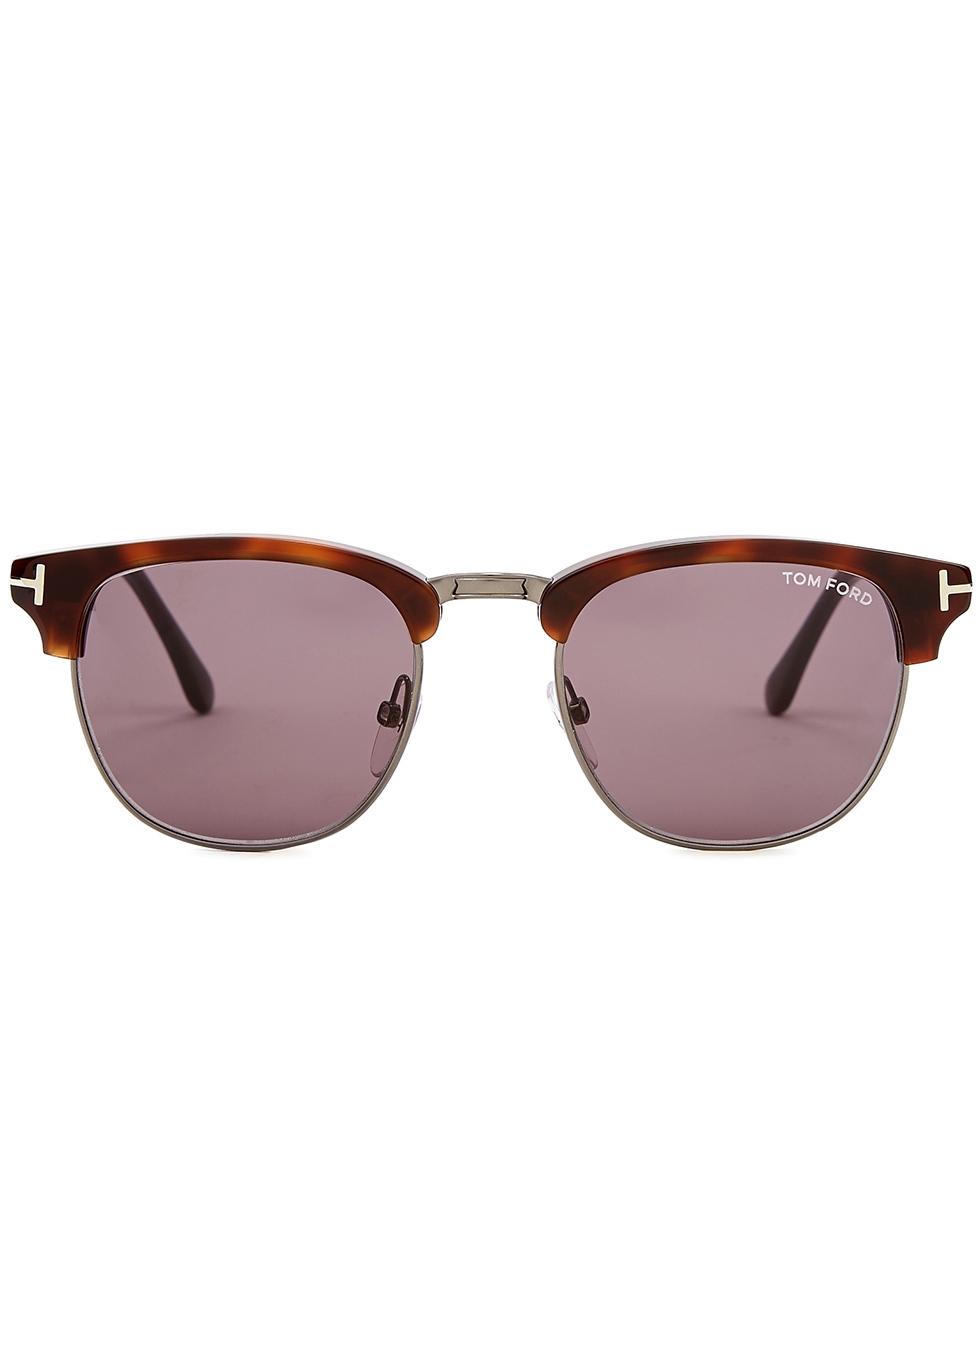 Sale online | Tom Ford Tortoiseshell clubmaster-style sunglasses color ...